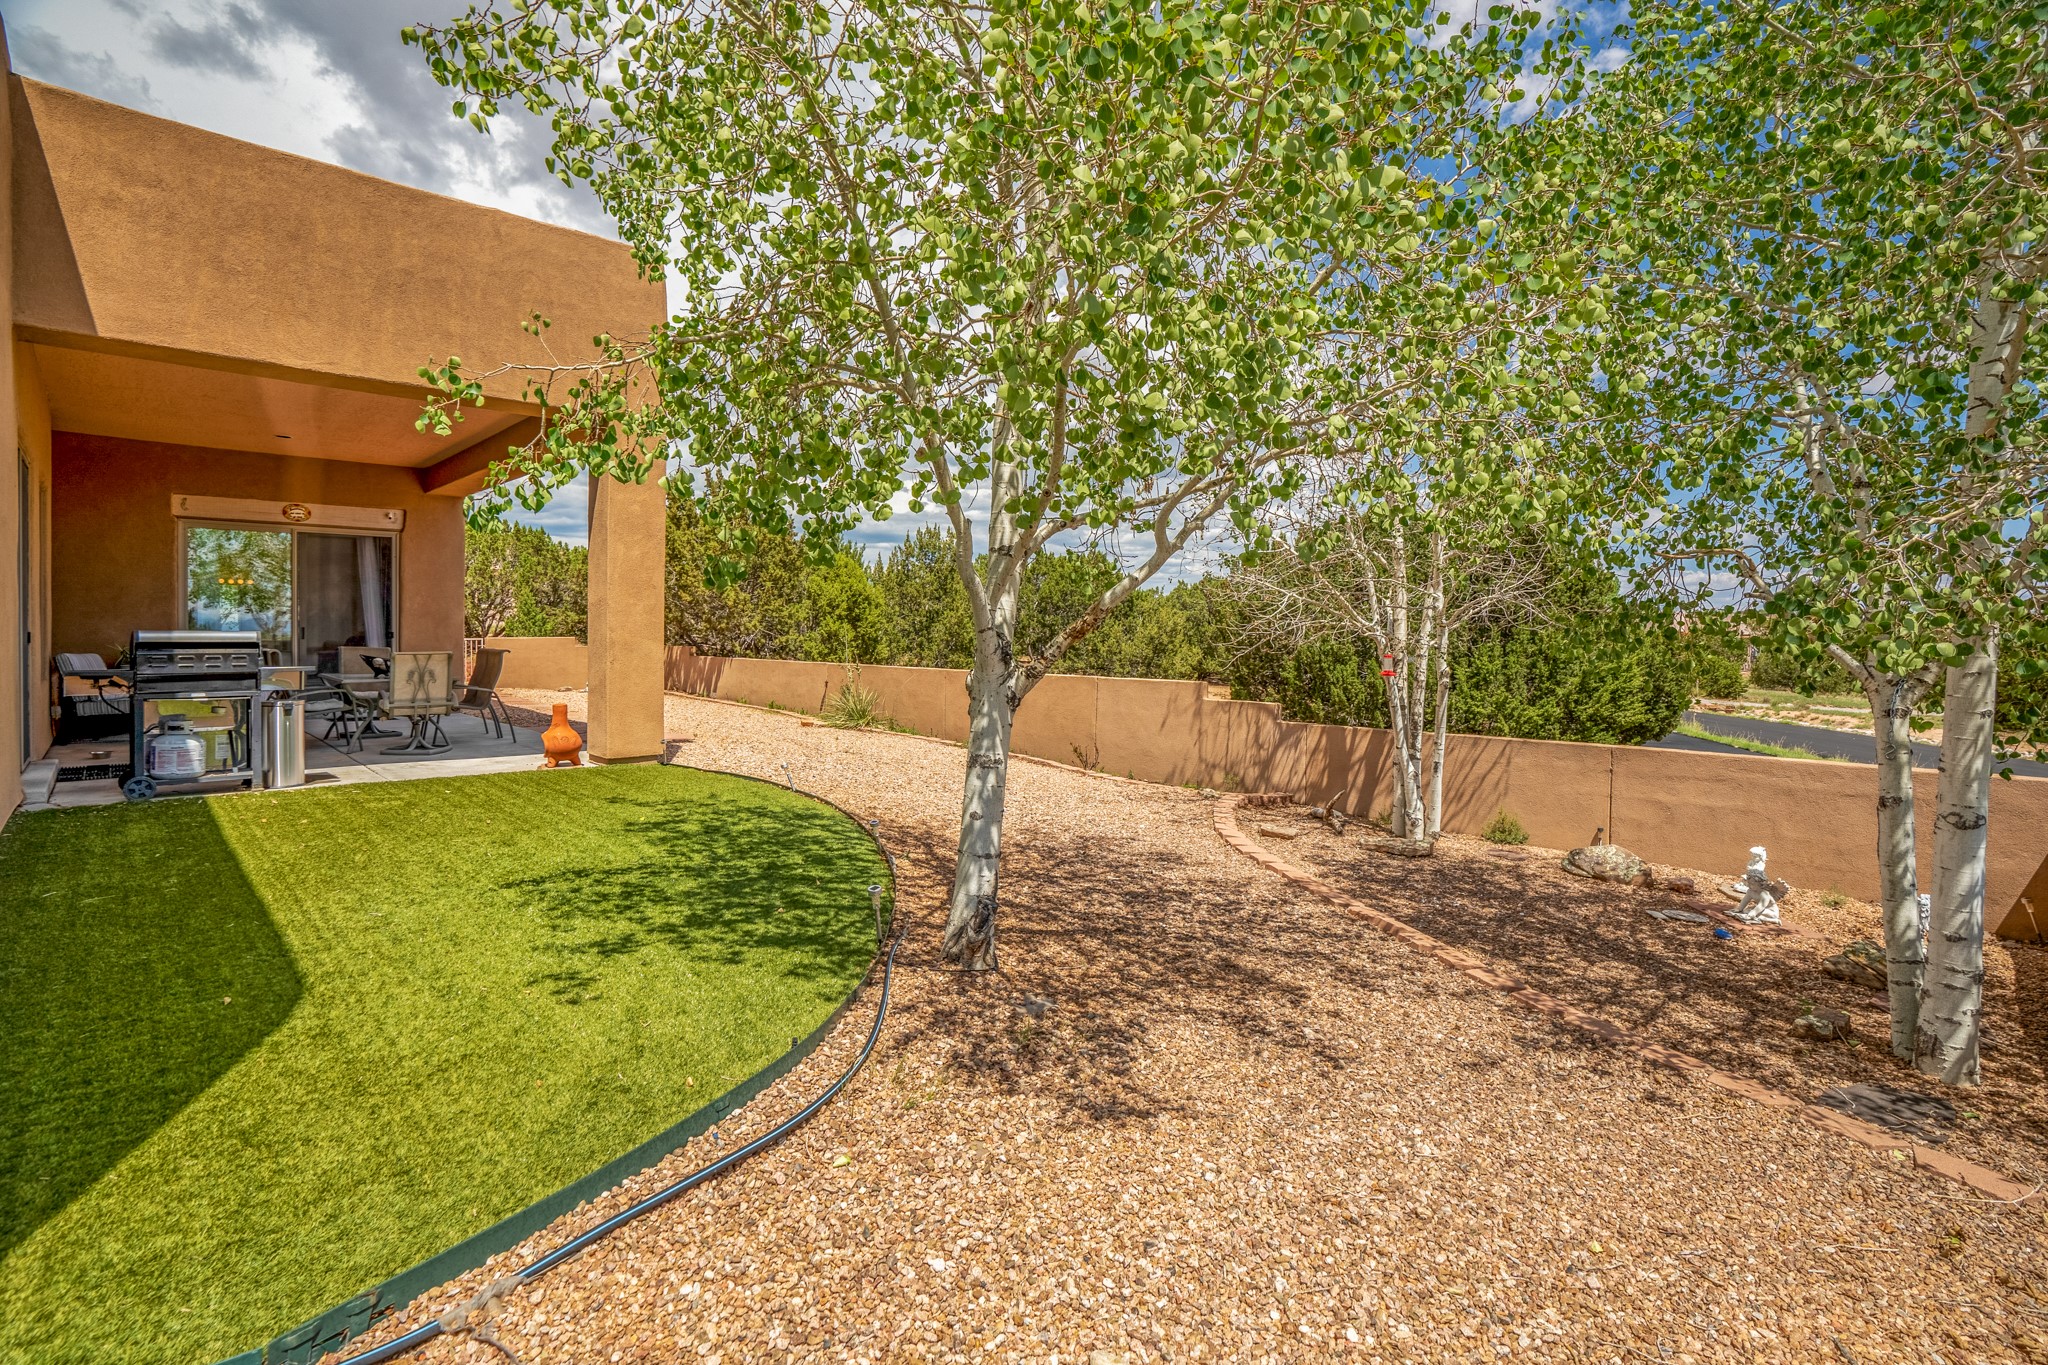 11 Rocky Slope, Santa Fe, New Mexico 87508, 5 Bedrooms Bedrooms, ,4 BathroomsBathrooms,Residential,For Sale,11 Rocky Slope,202232044